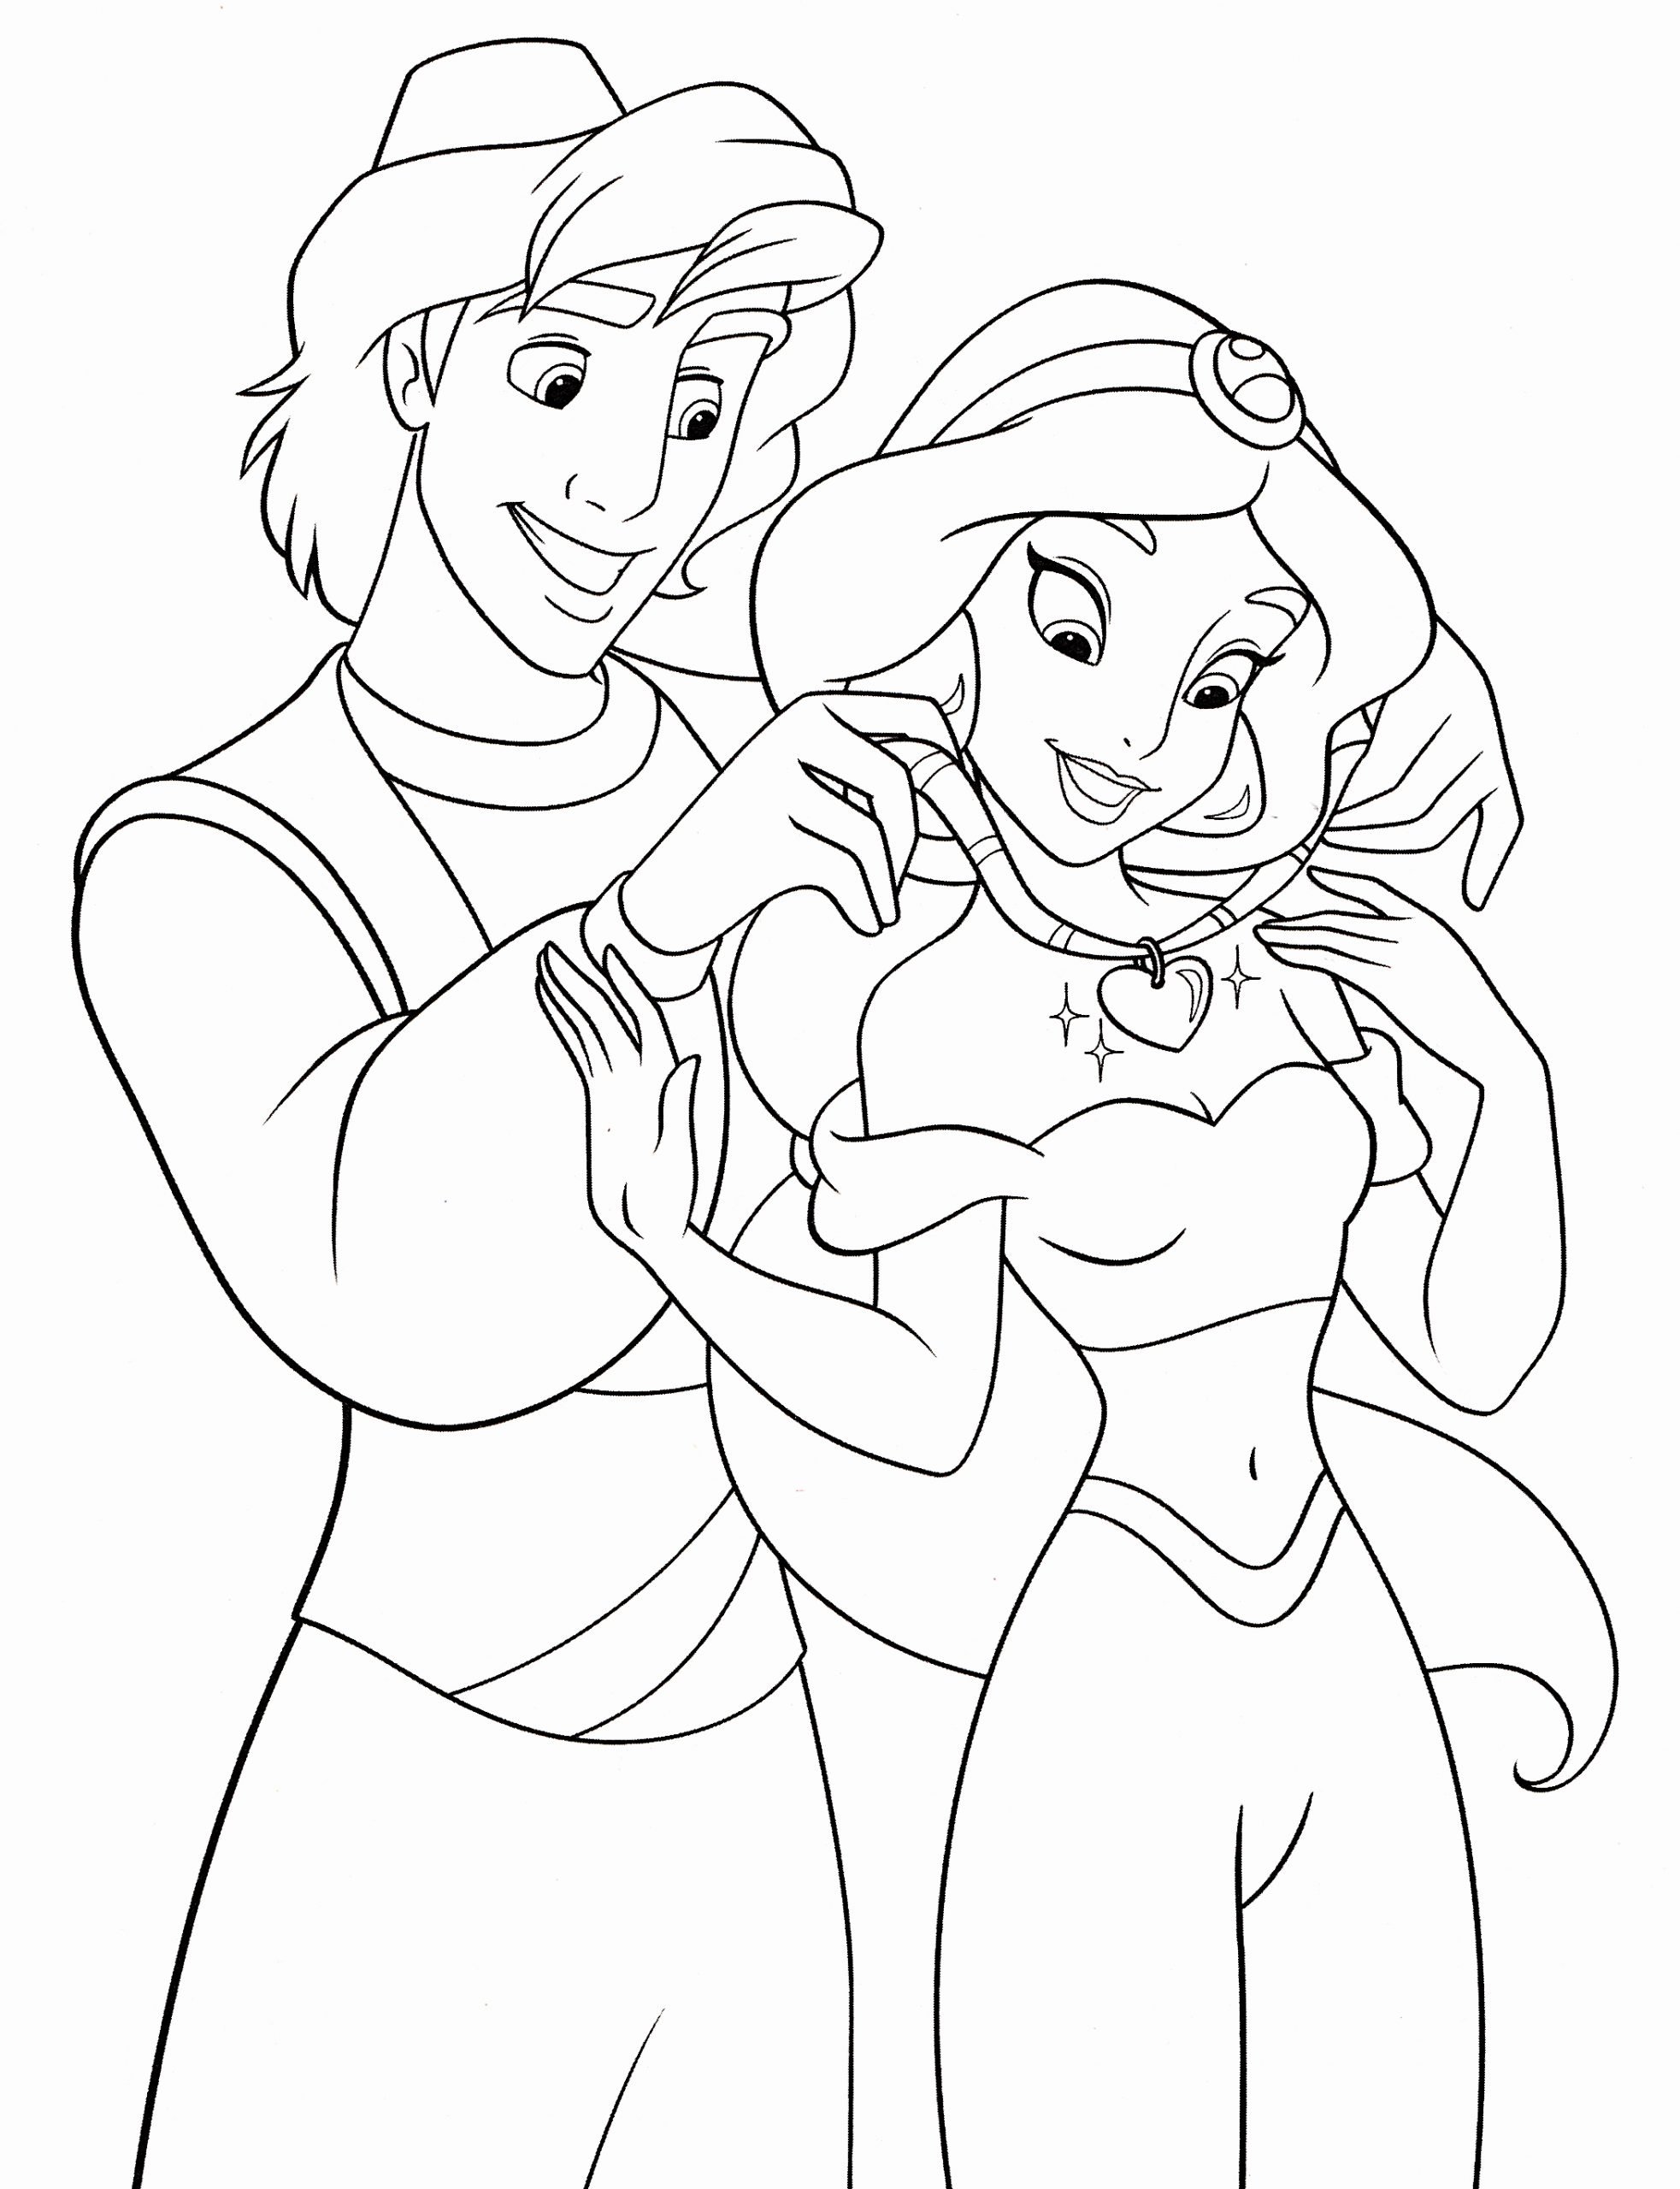 Star Wars coloring pages - Free 35+ Coloring Pages Disney Princess Jasmine